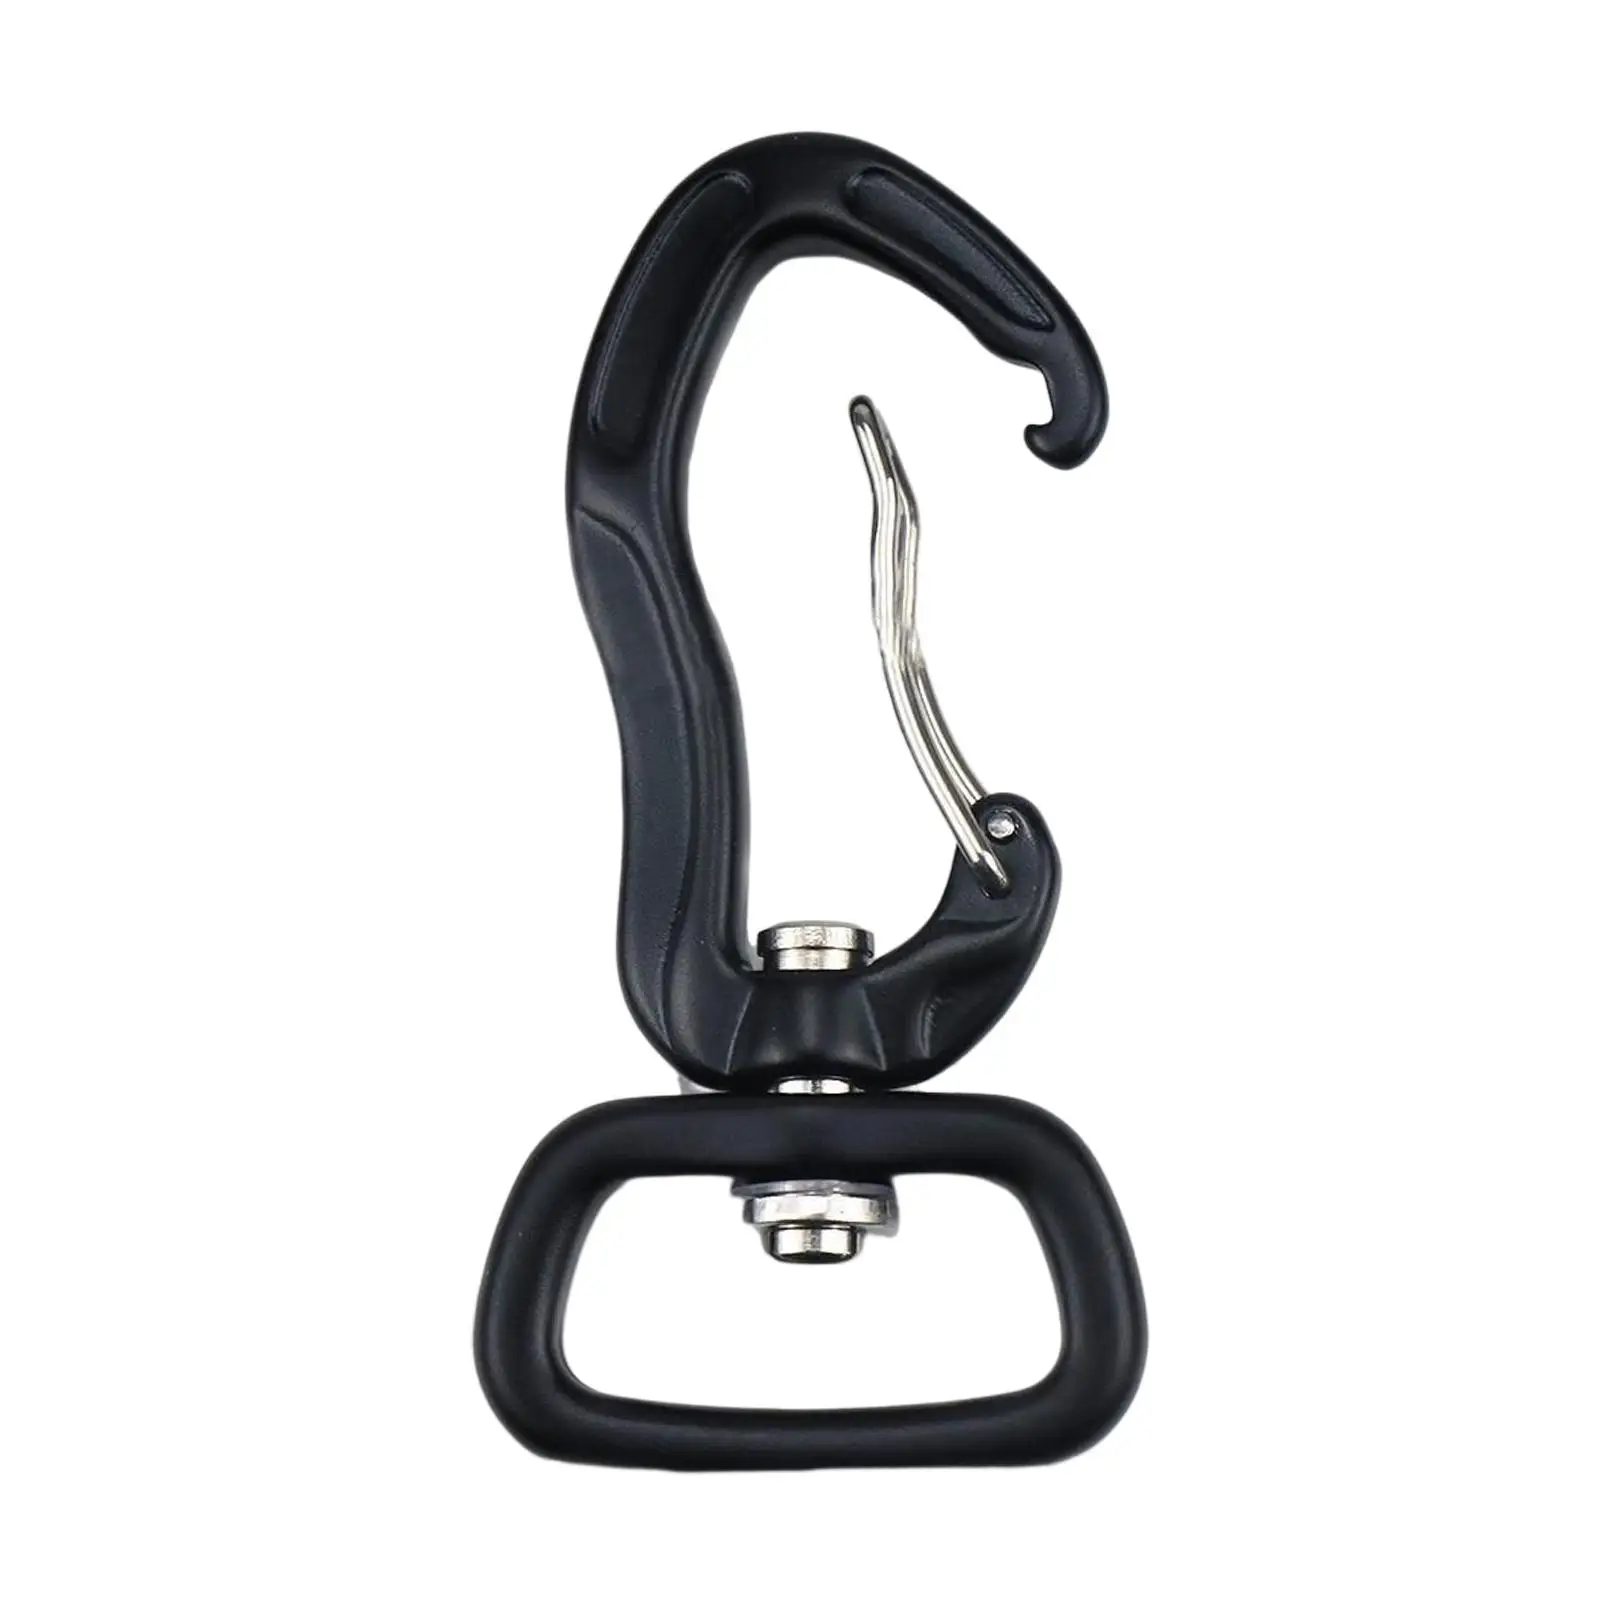 Swivel Carabiner Clip Pets Leash Boat Anchor Rope 360° Rotatable Key Chain